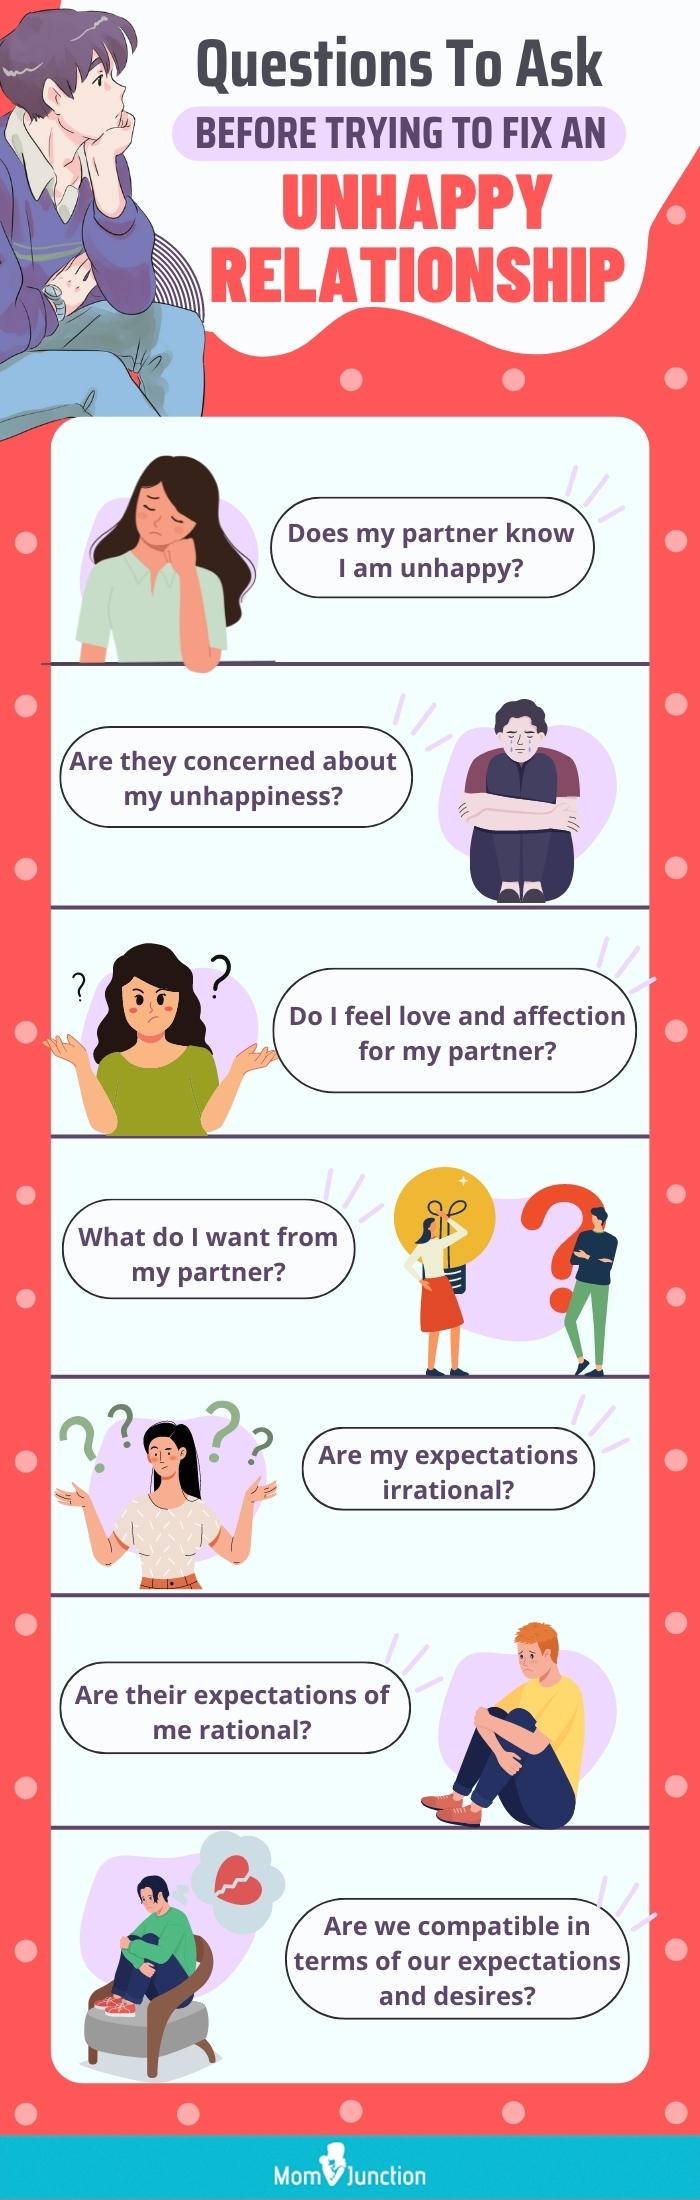 tips to deal unhappy relationship (infographic)